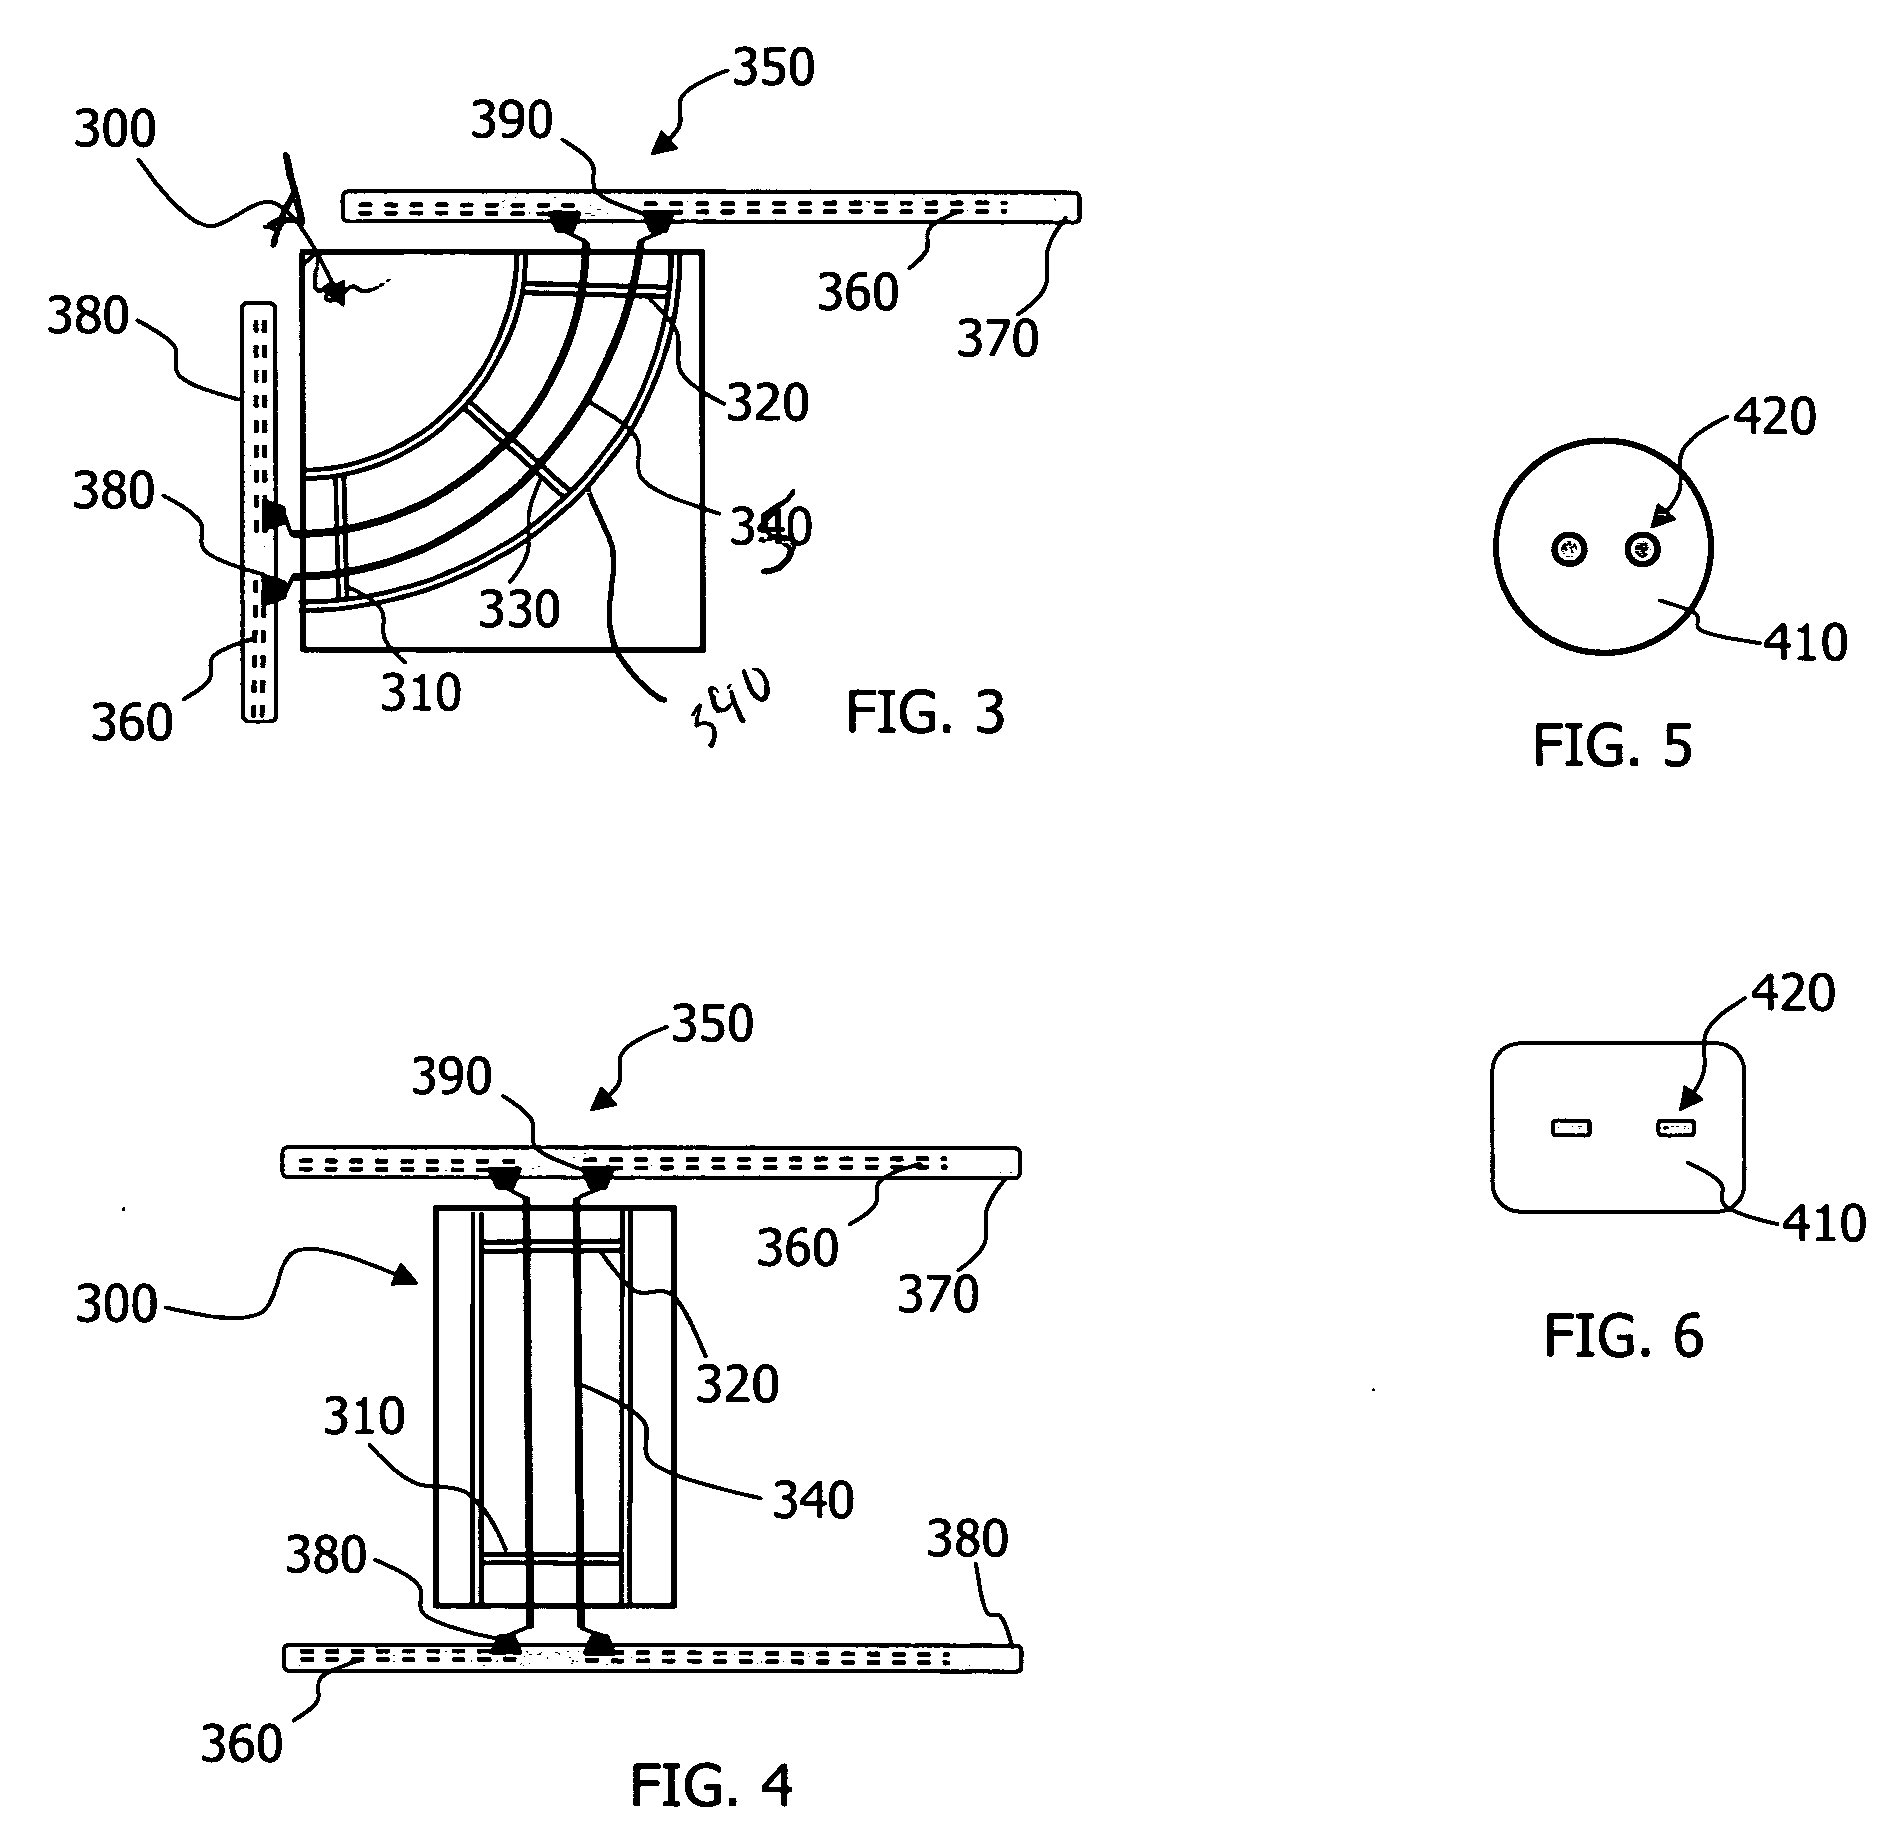 Electronic component connection support structures including air as a dielectric